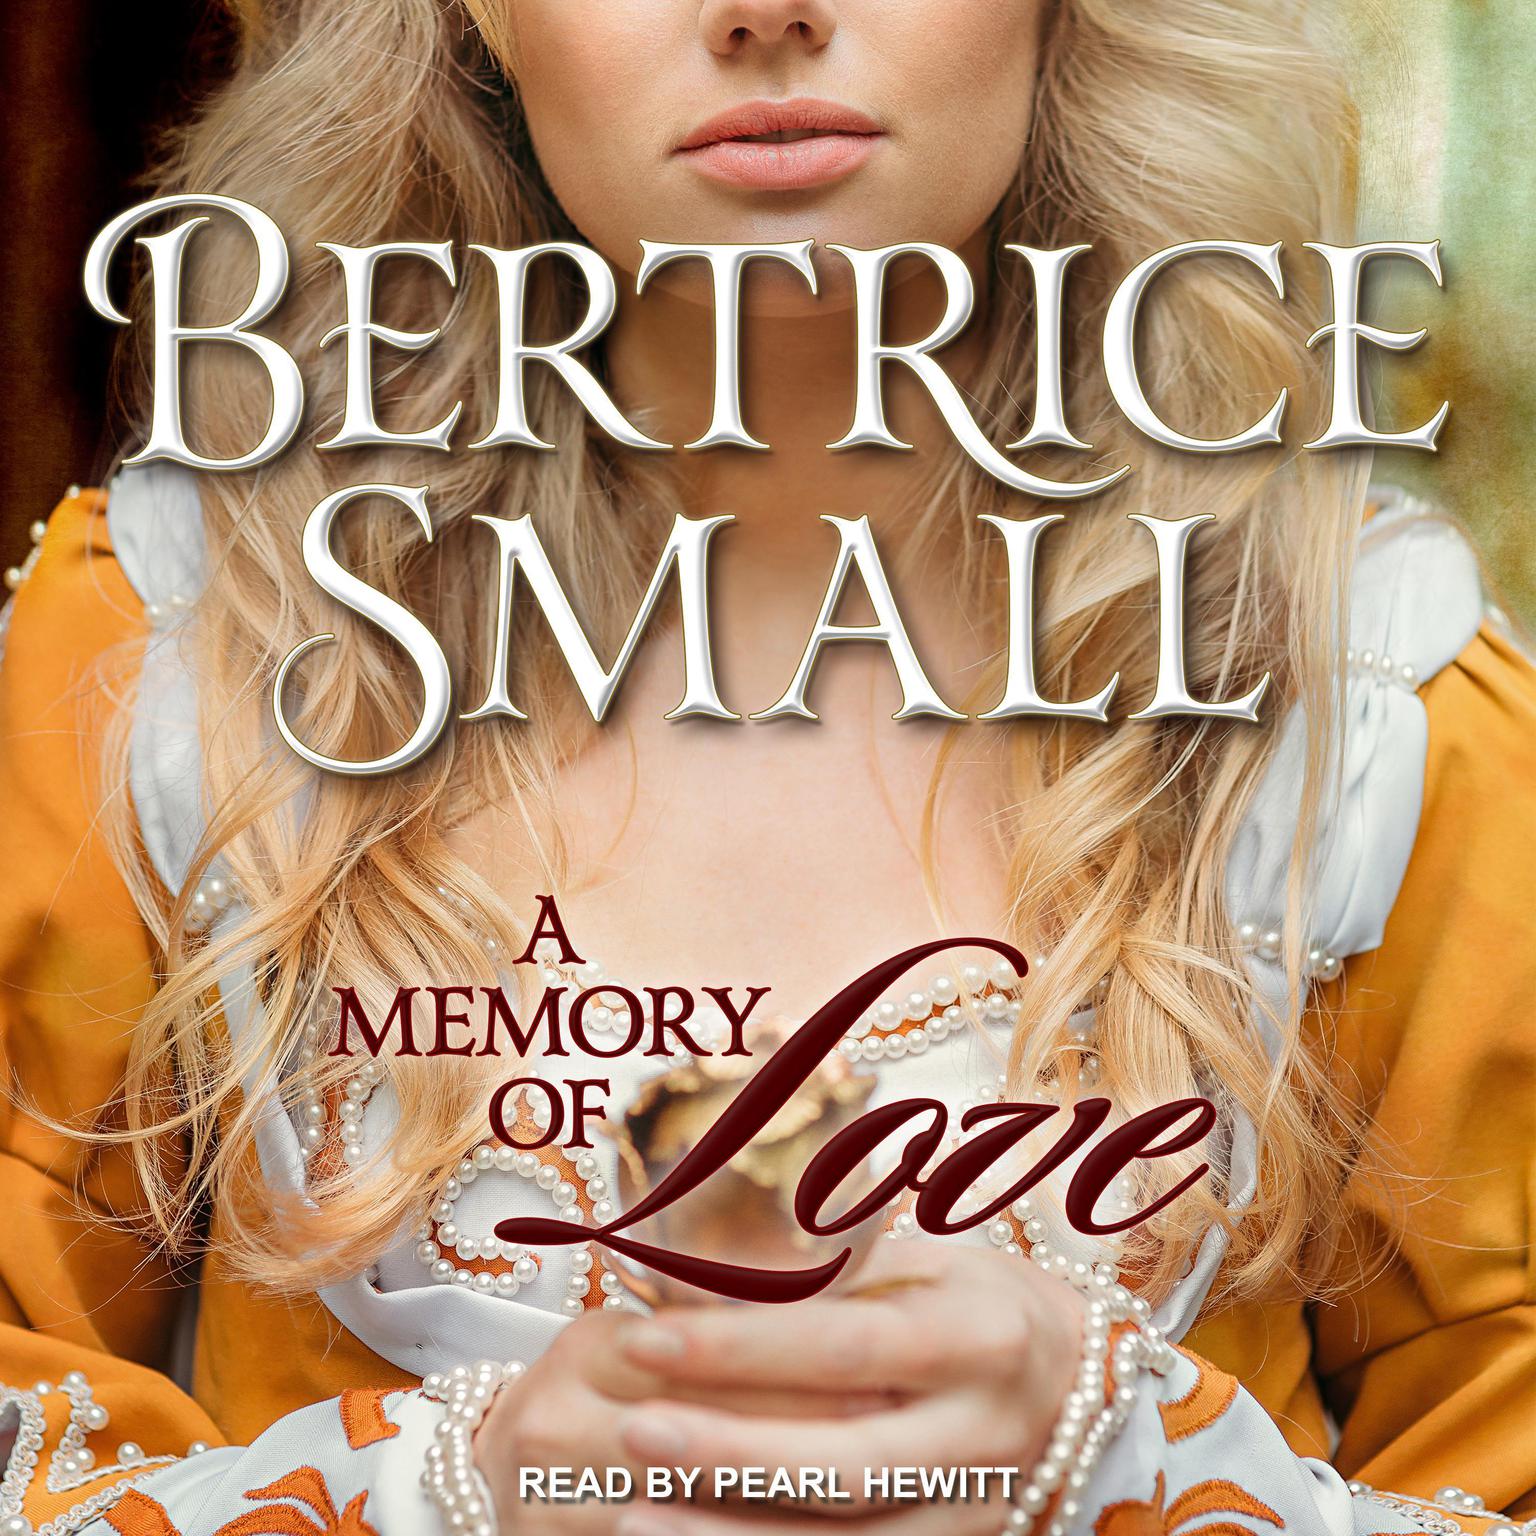 A Memory of Love Audiobook, by Bertrice Small